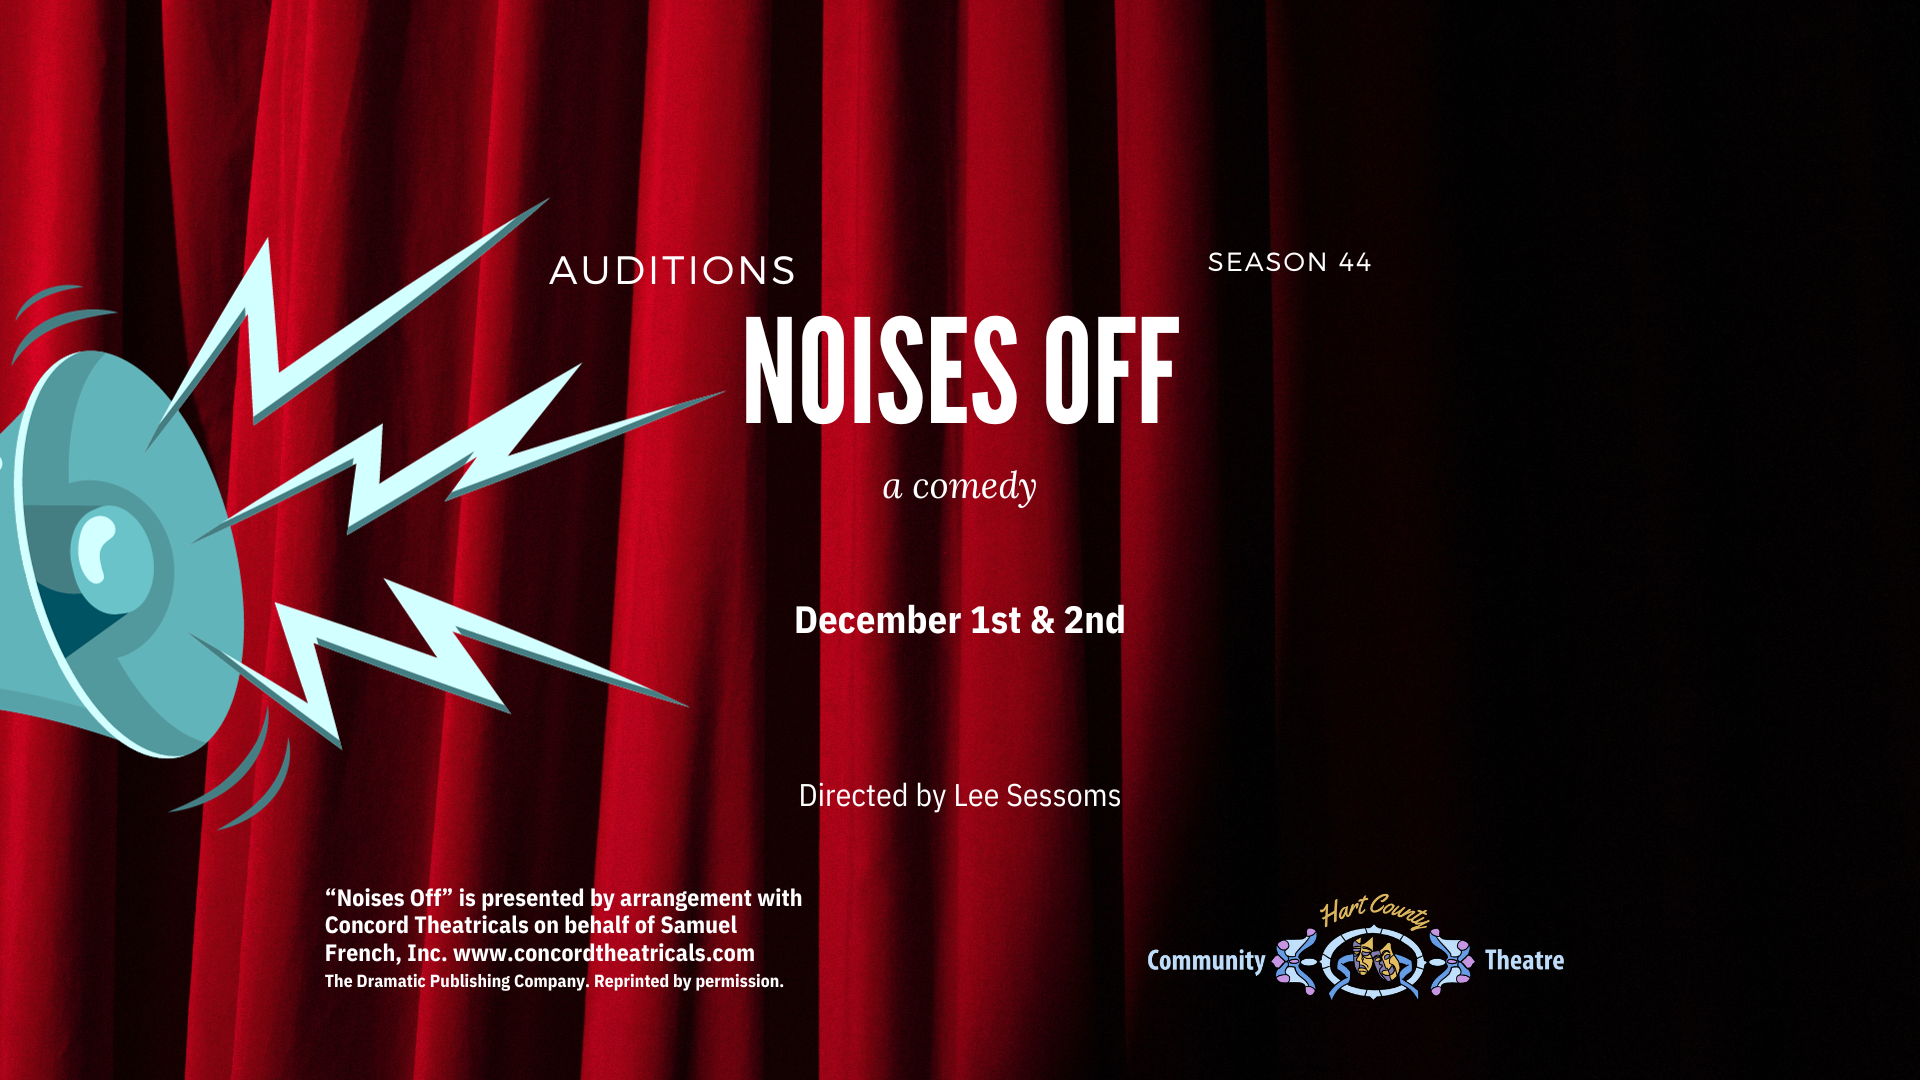 You are currently viewing Auditions for Noises Off, Season 44